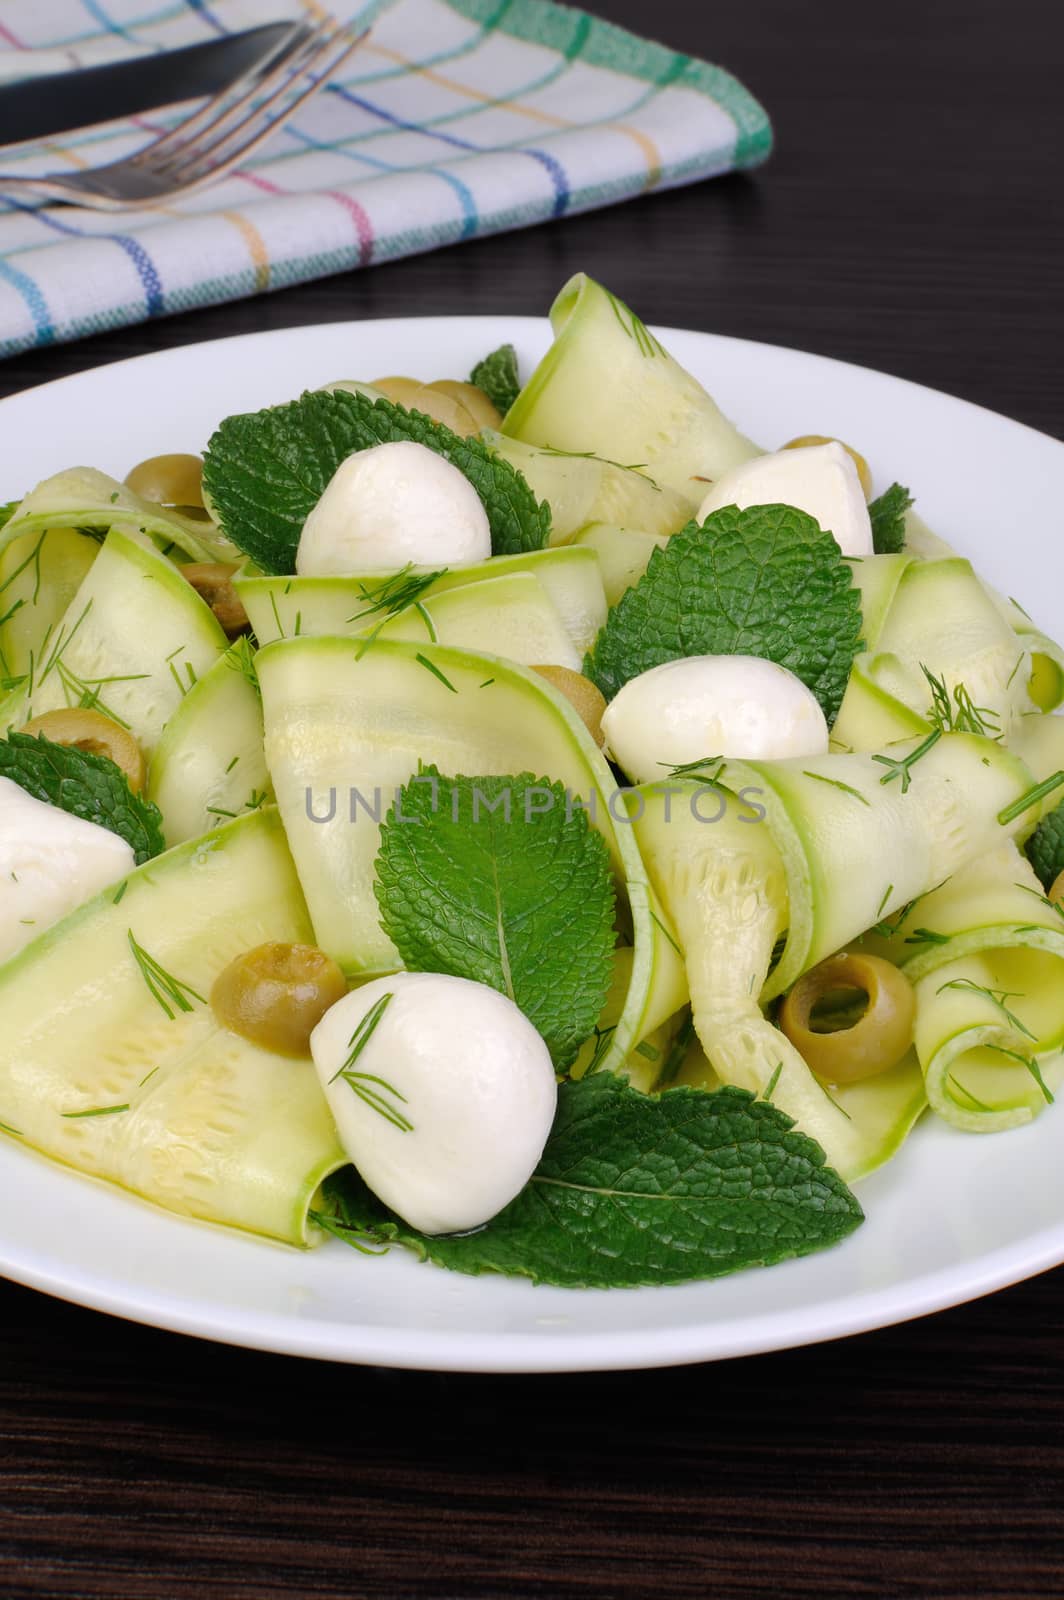 Zucchini salad with mozzarella, olives, dill and mint